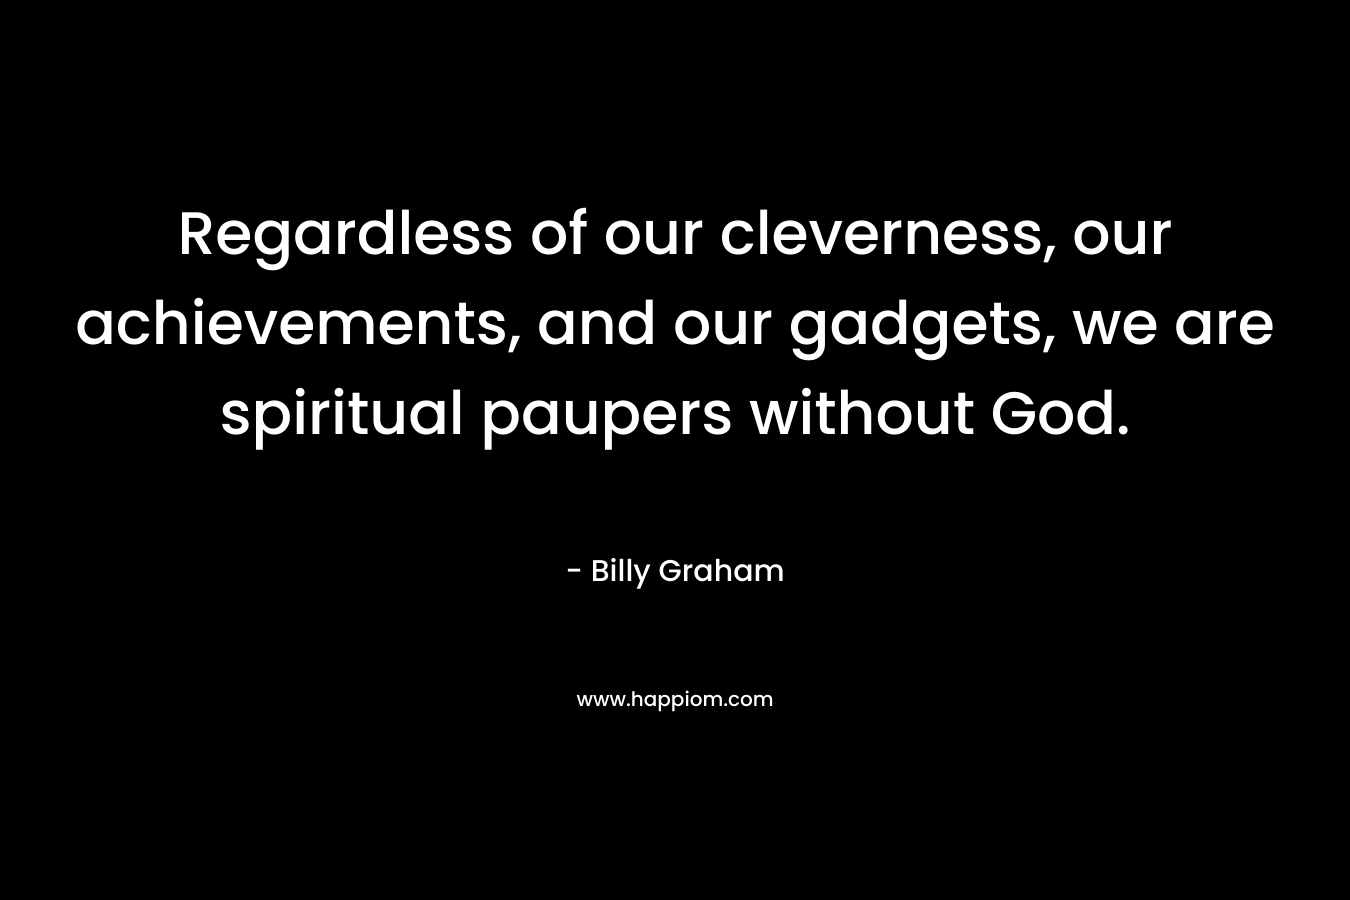 Regardless of our cleverness, our achievements, and our gadgets, we are spiritual paupers without God. – Billy Graham